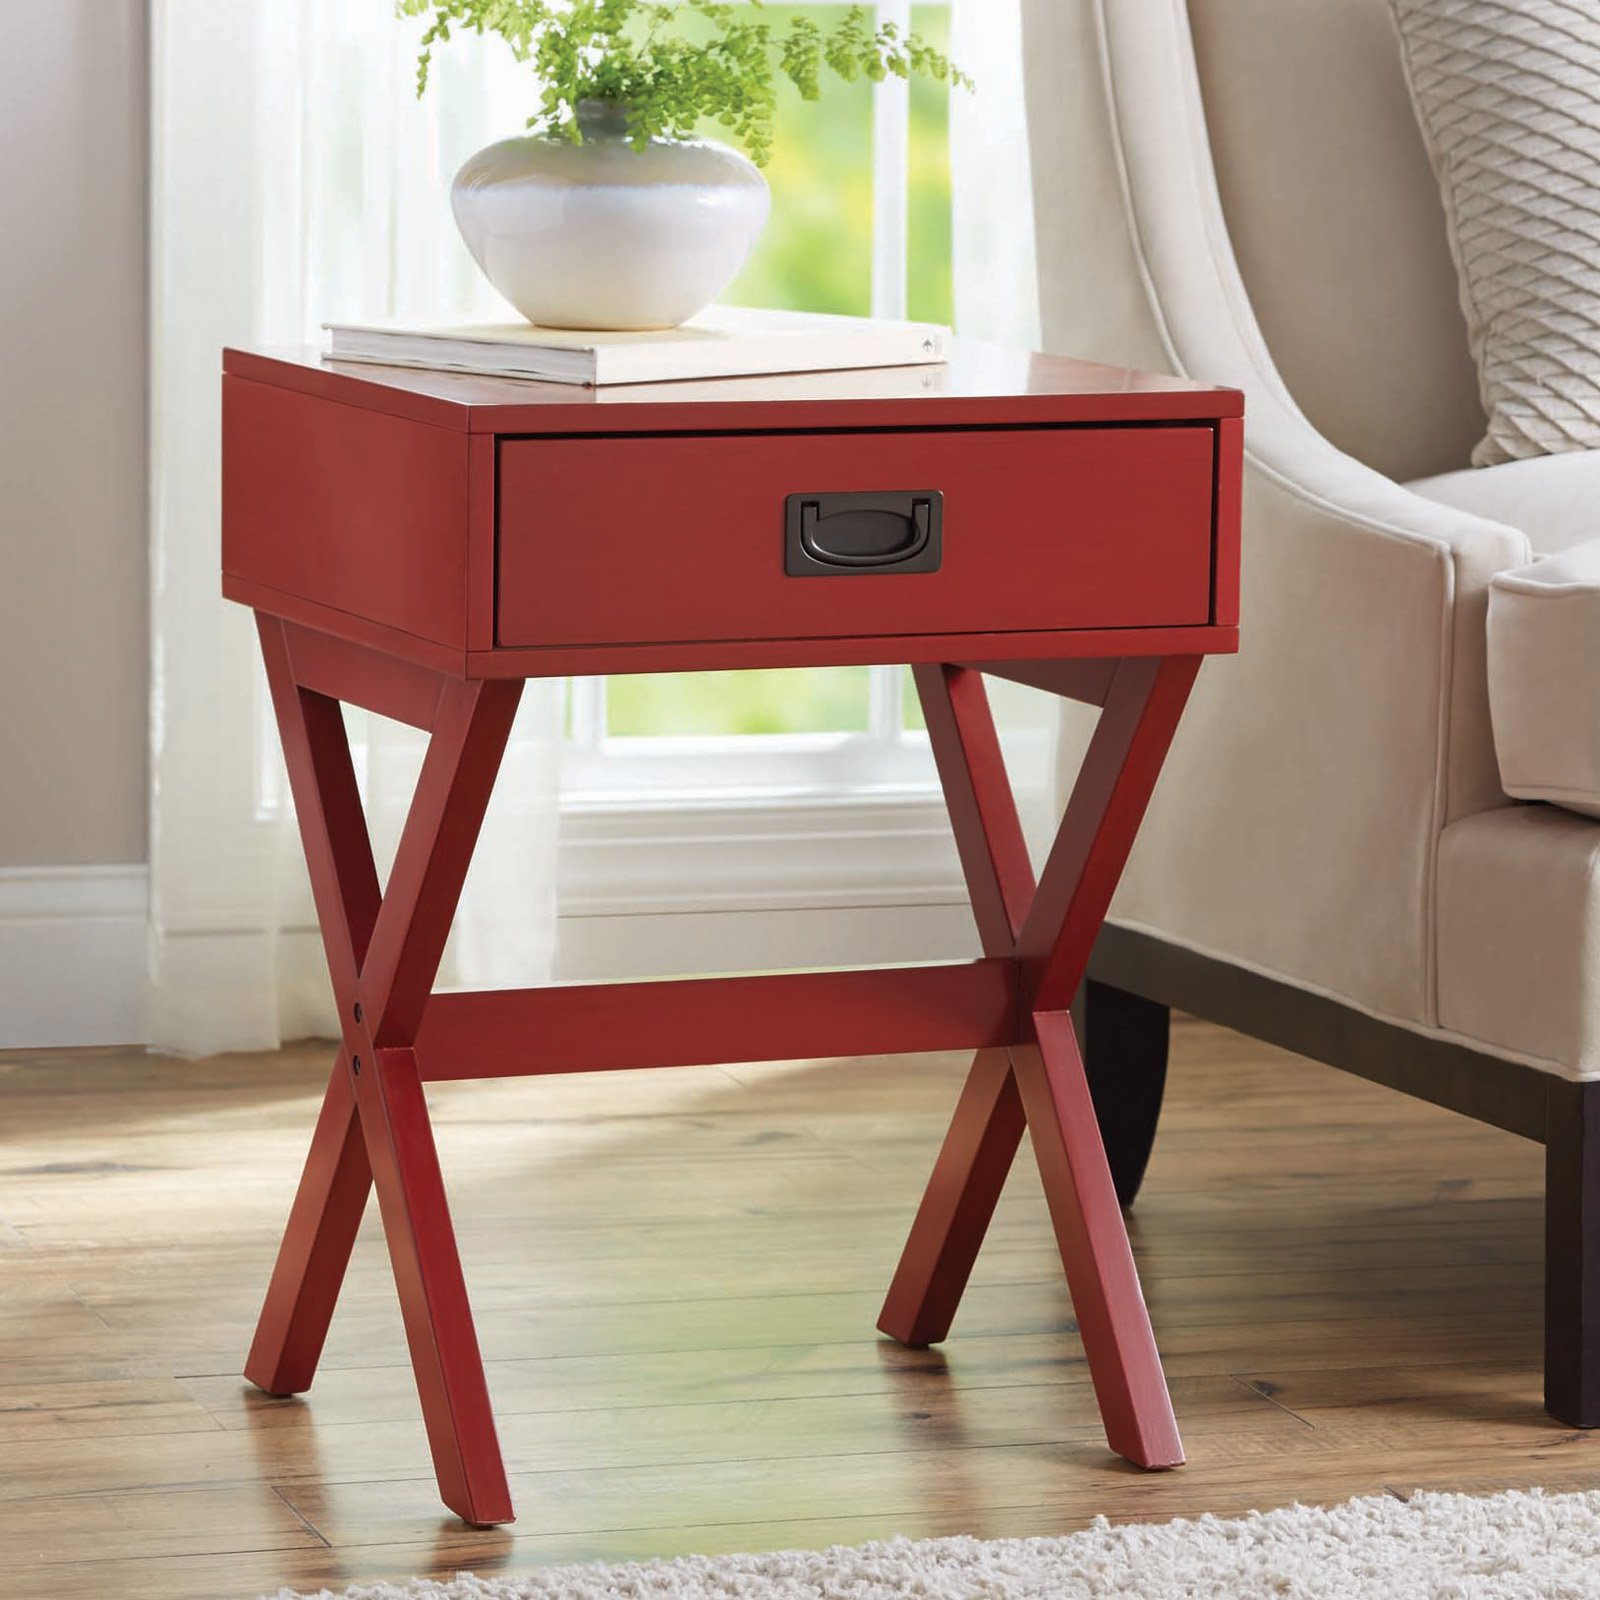 Better Homes & Gardens X-Leg Accent Table with Drawer, Multiple Colors - image 5 of 6